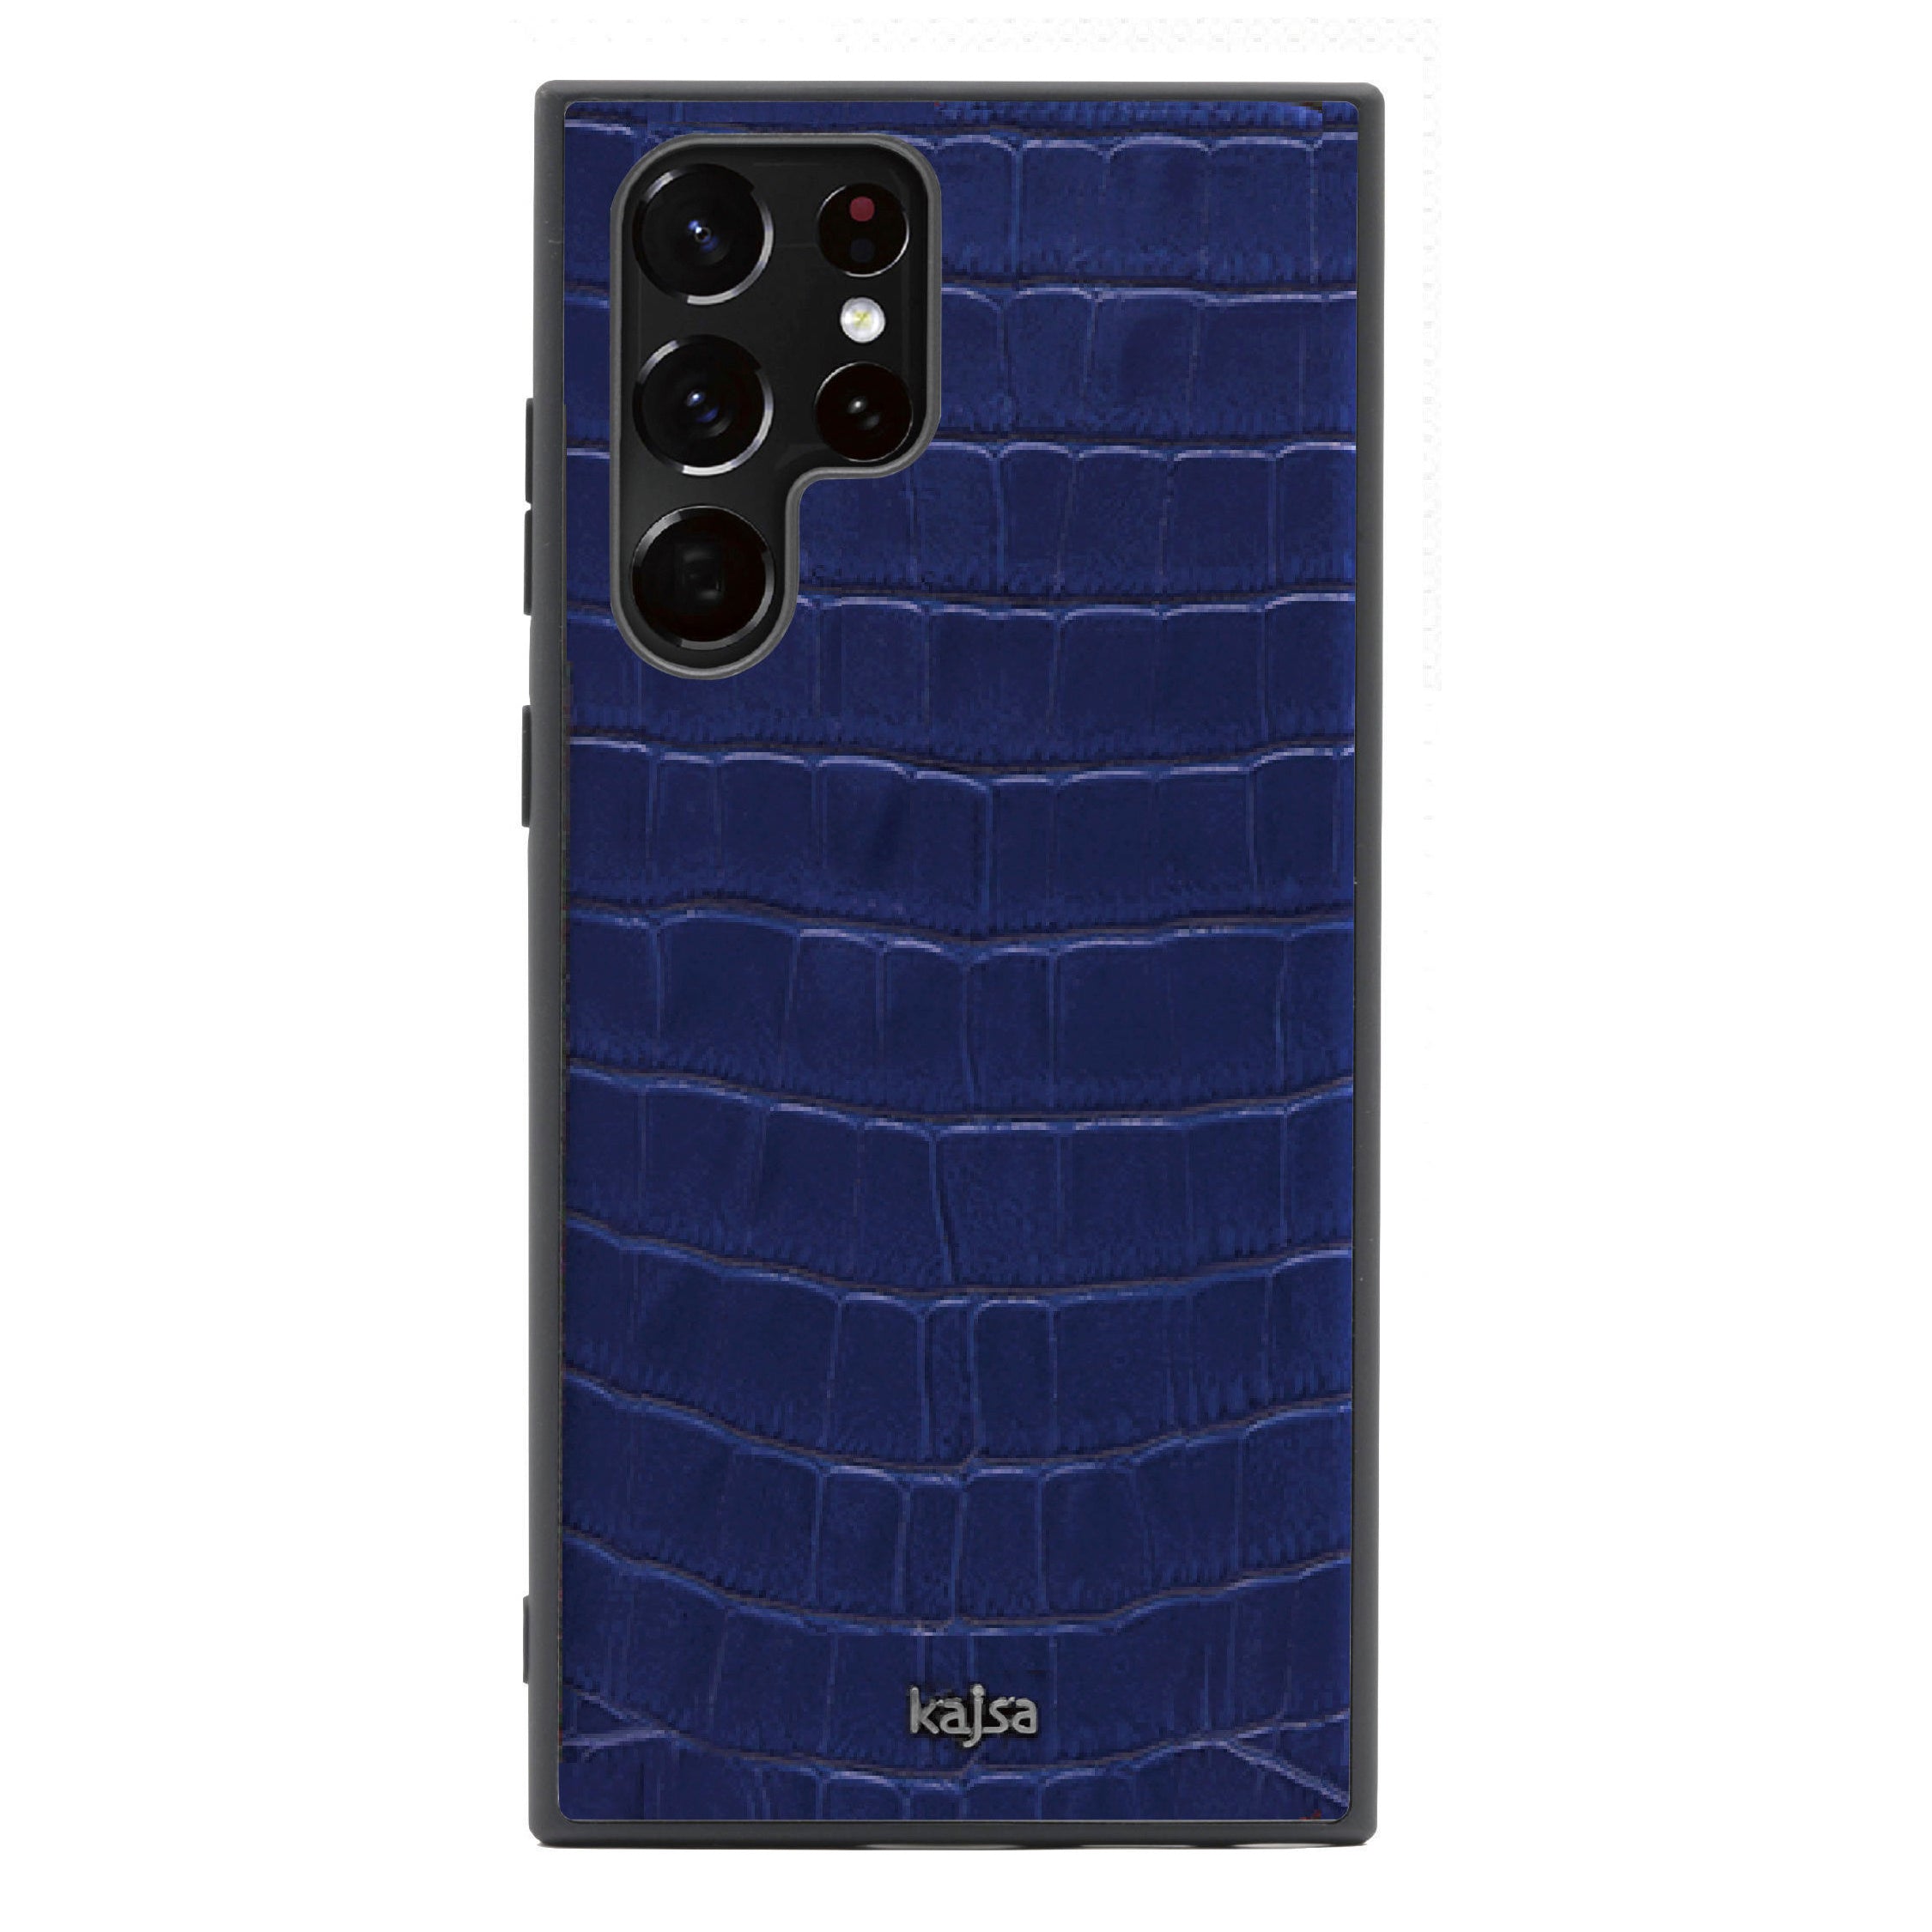 Neo Classic Collection - Genuine Croco Pattern Leather Back Case for Samsung Galaxy S22/S22+/S22 Ultra-Phone Case- phone case - phone cases- phone cover- iphone cover- iphone case- iphone cases- leather case- leather cases- DIYCASE - custom case - leather cover - hand strap case - croco pattern case - snake pattern case - carbon fiber phone case - phone case brand - unique phone case - high quality - phone case brand - protective case - buy phone case hong kong - online buy phone case - iphone‎手機殼 - 客製化手機殼 